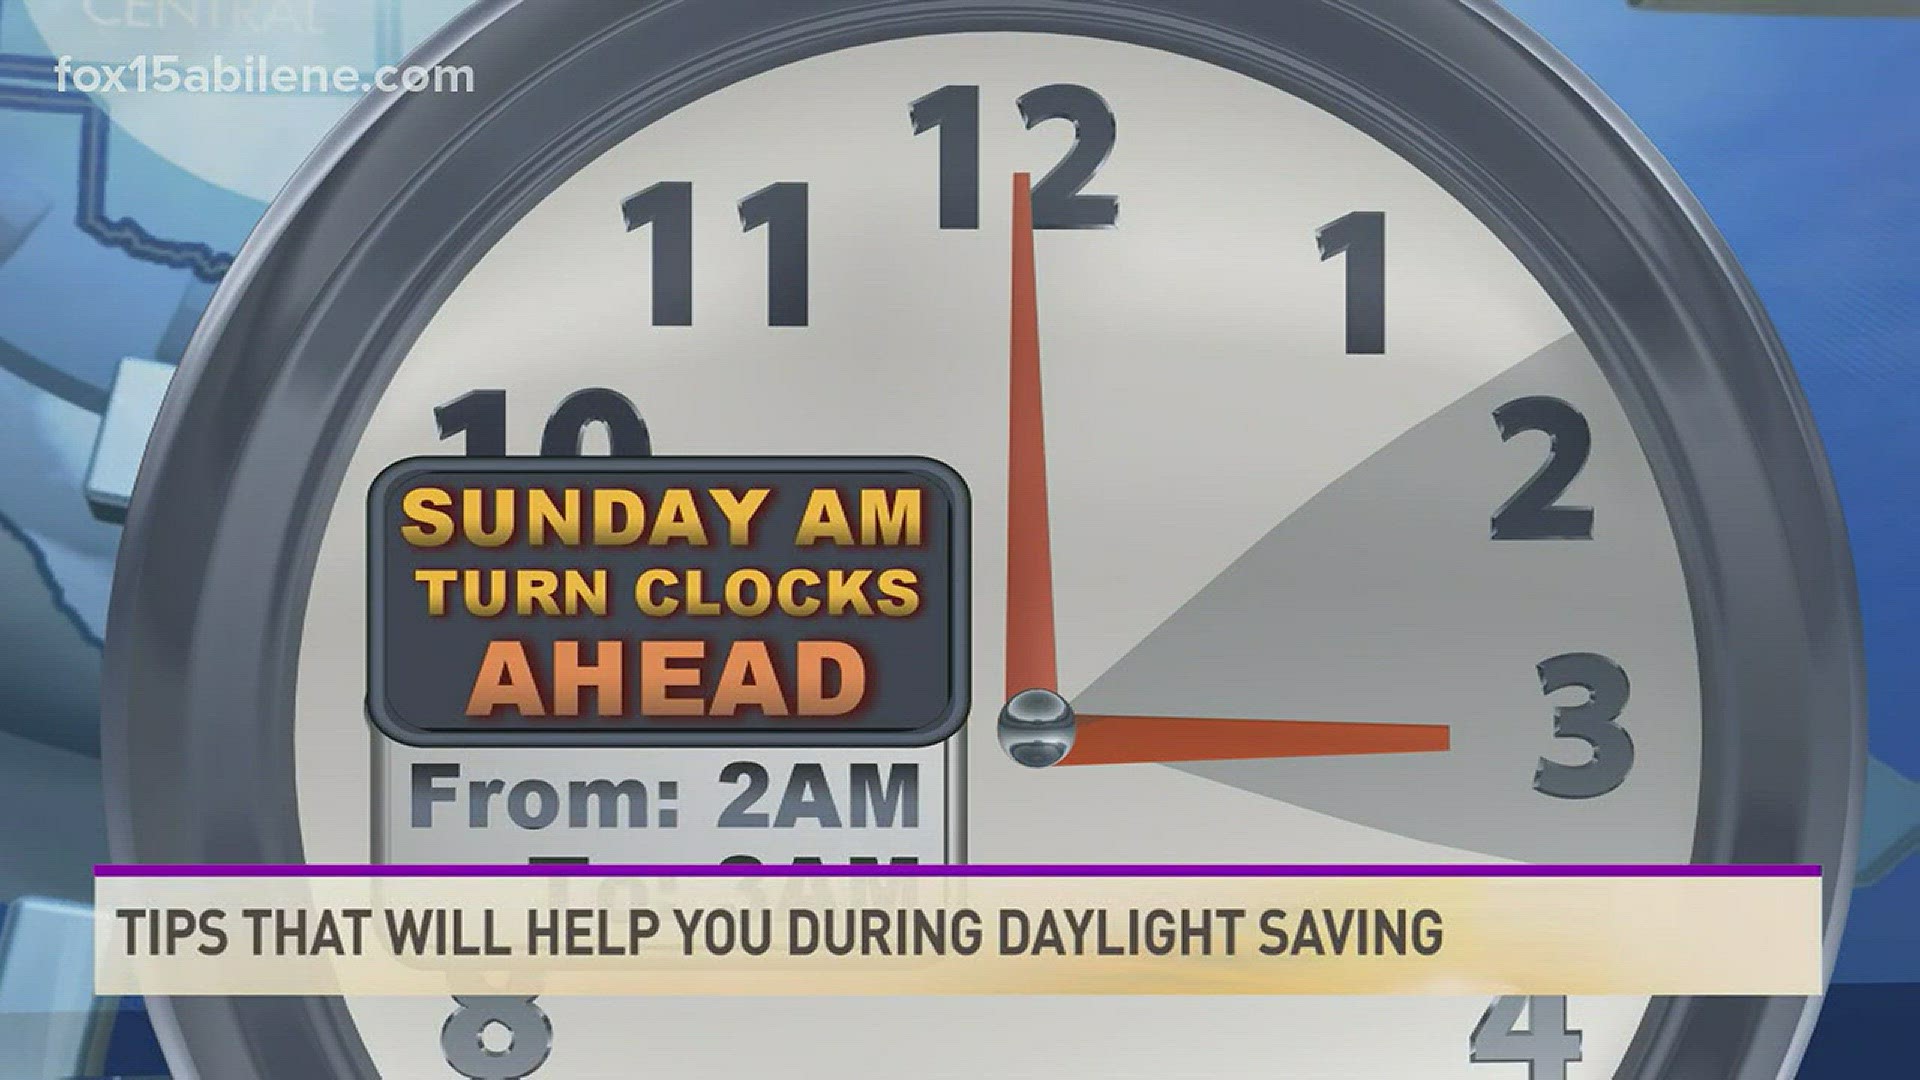 Dr. Archana Rao says adjusting your sleep schedule needs to be done in increments before the clocks spring forward.